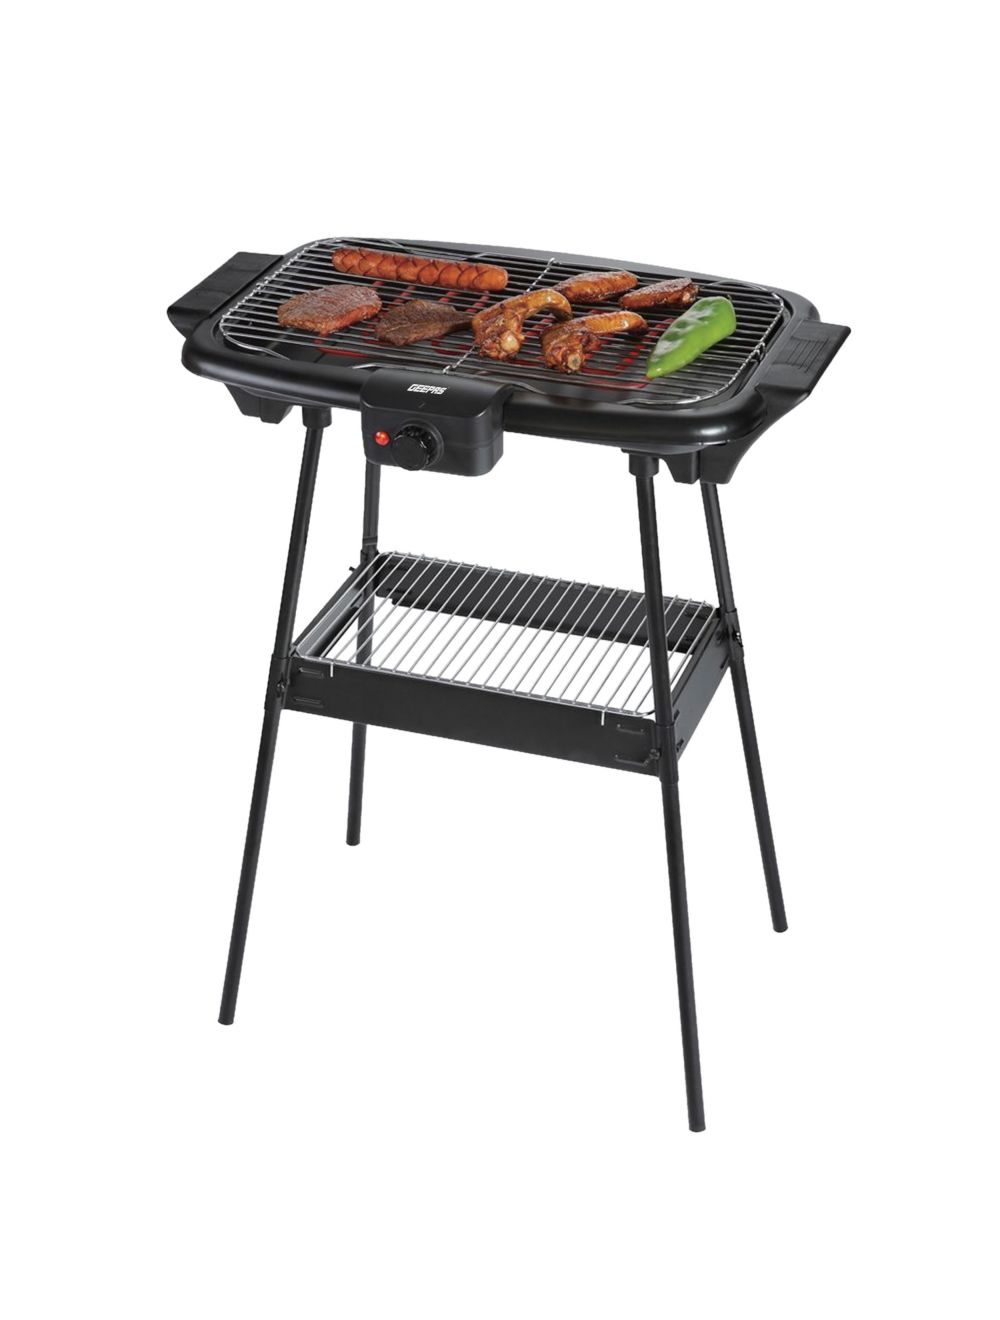 Geepas Electric Barbecue Grill GBG5480